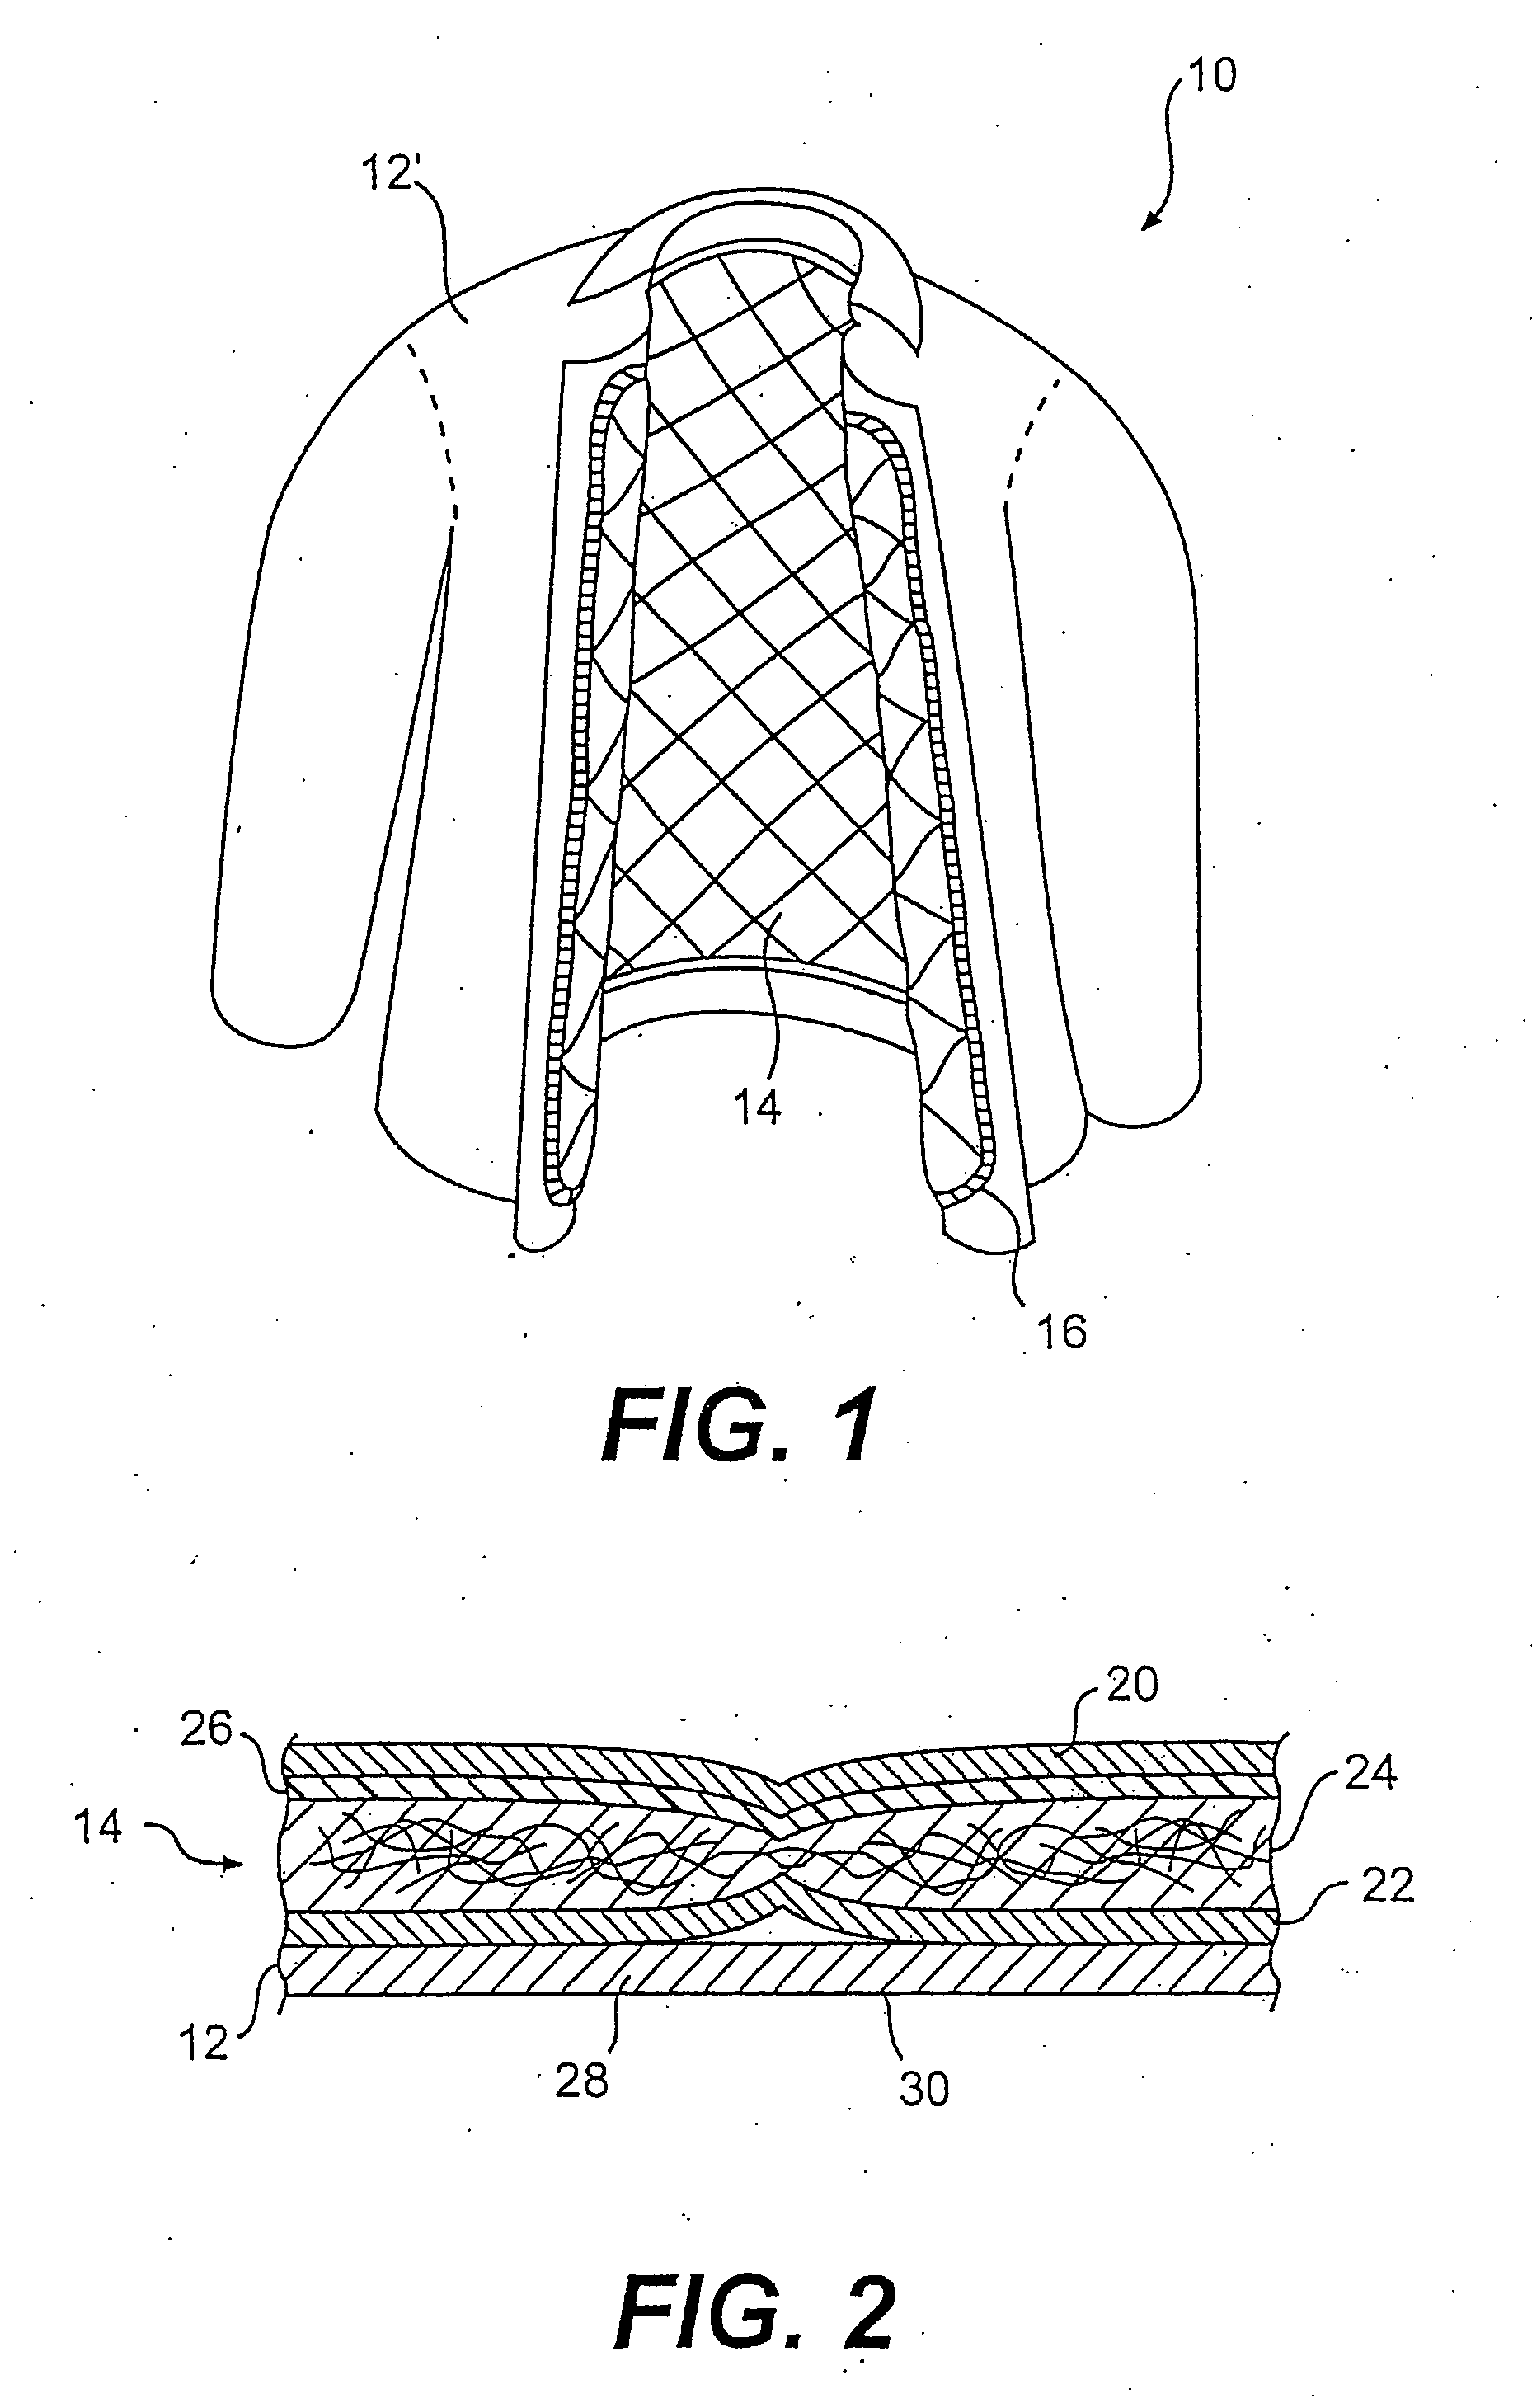 Water resistant protective garment for fire fighters